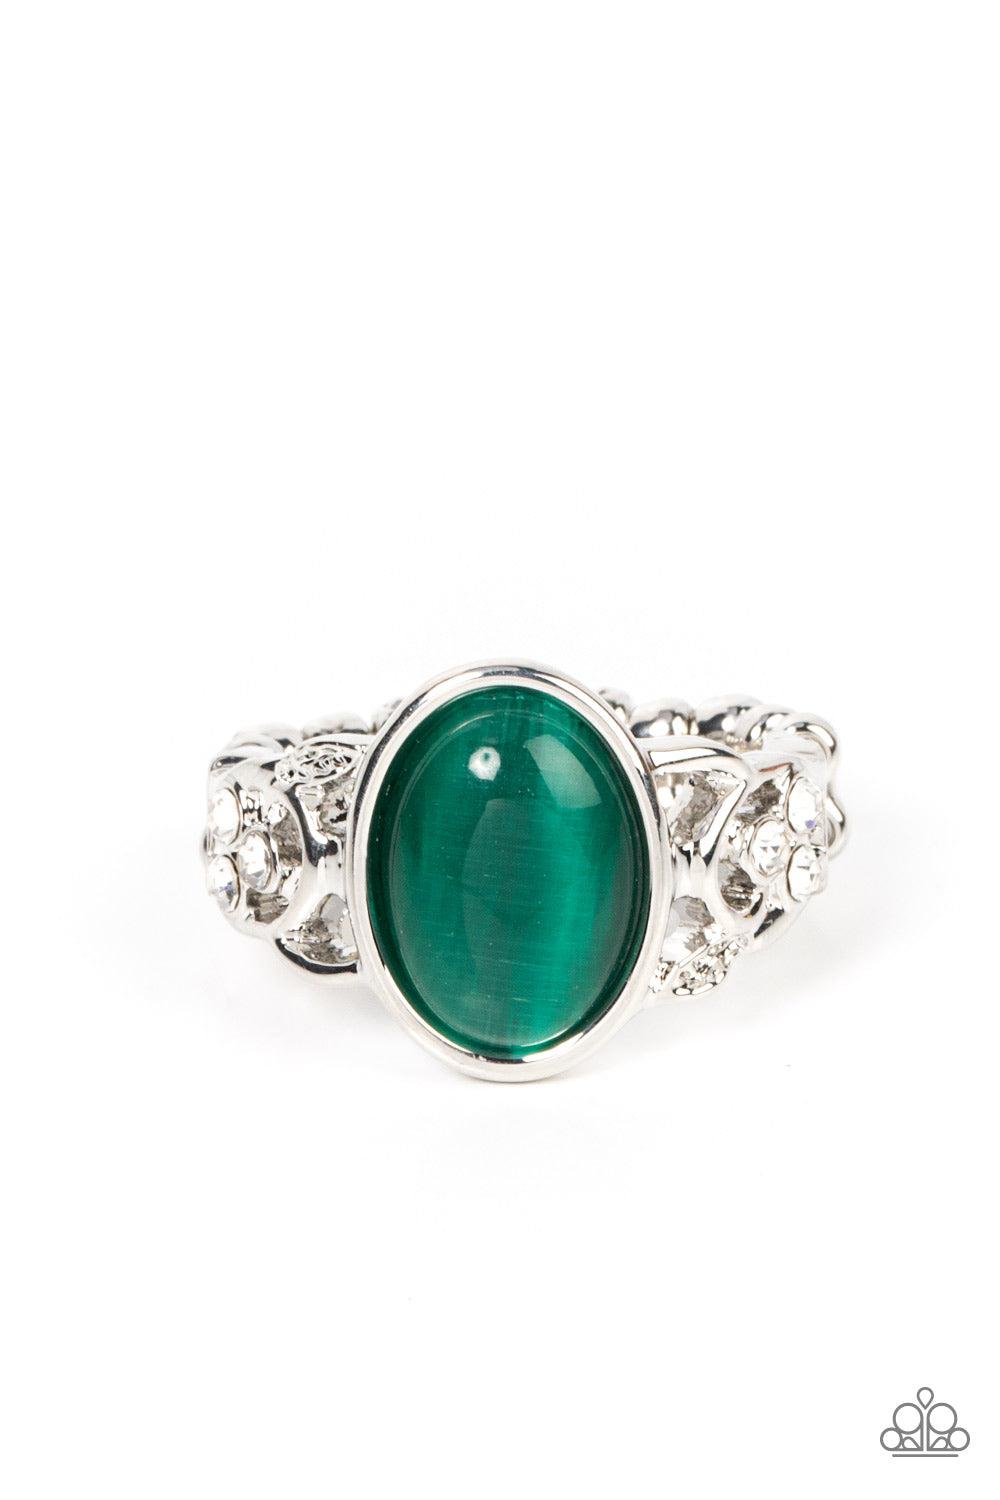 Crystals and Cats Eye Green Stone Ring - Paparazzi Accessories- lightbox - CarasShop.com - $5 Jewelry by Cara Jewels